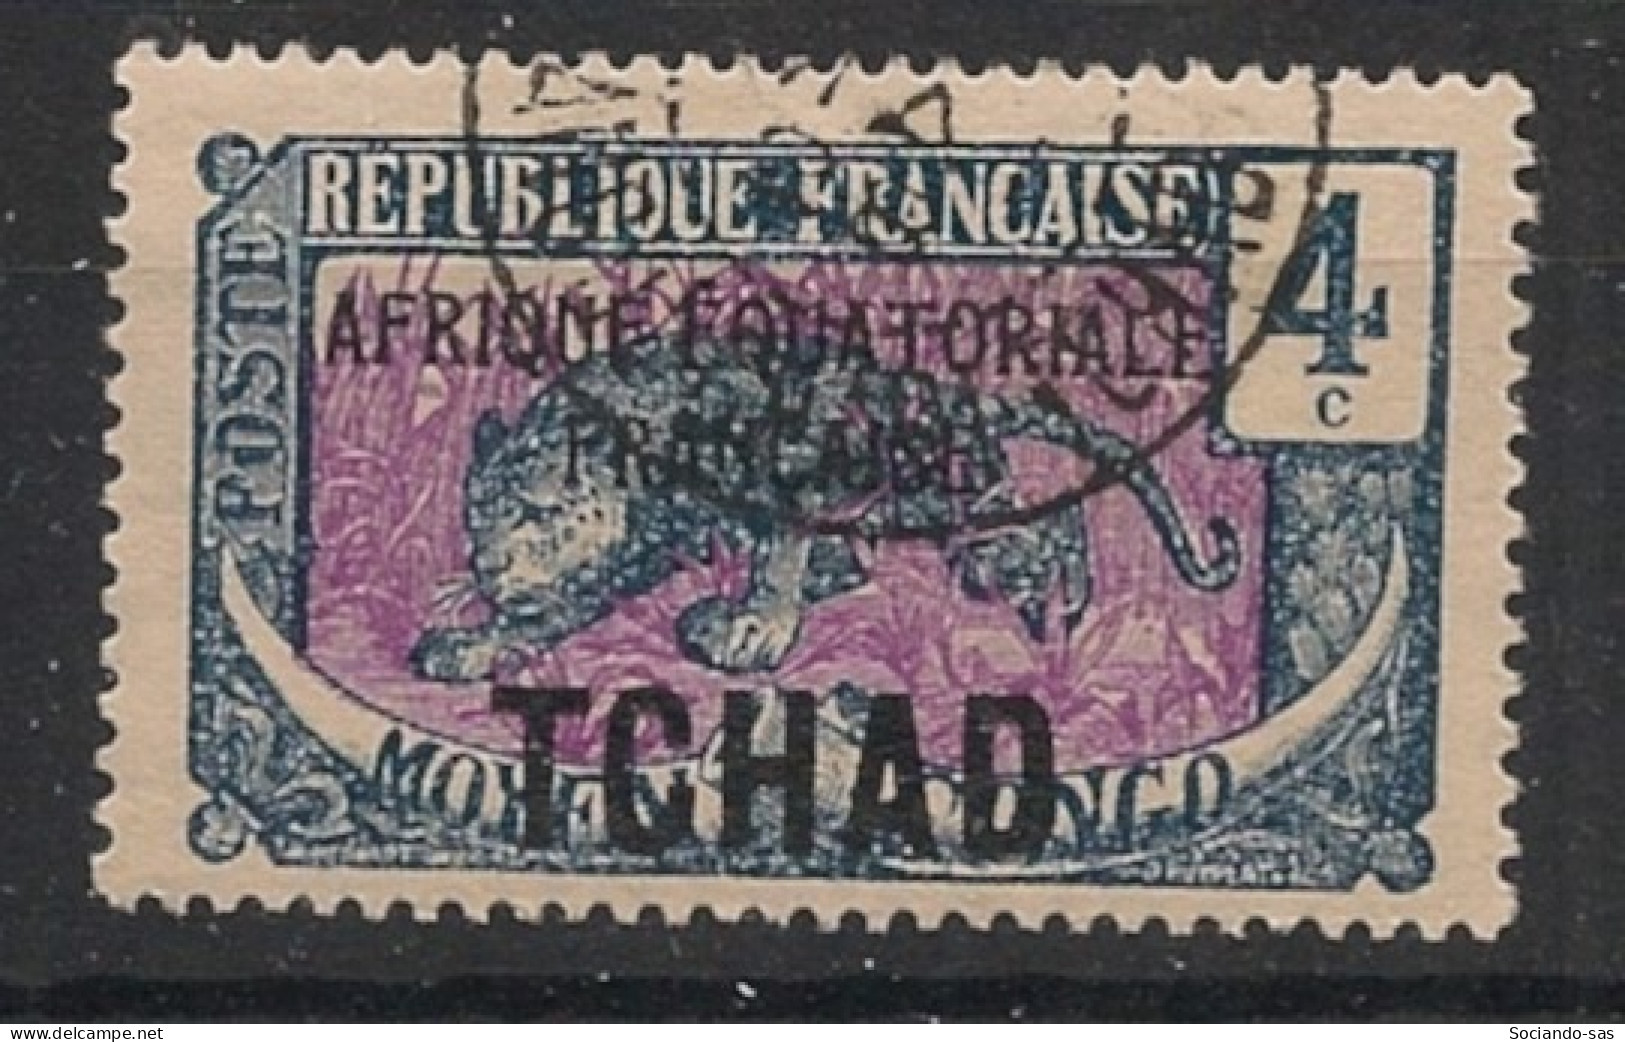 TCHAD - 1924 - N°YT. 21 - Panthère 4c - Oblitéré / Used - Used Stamps